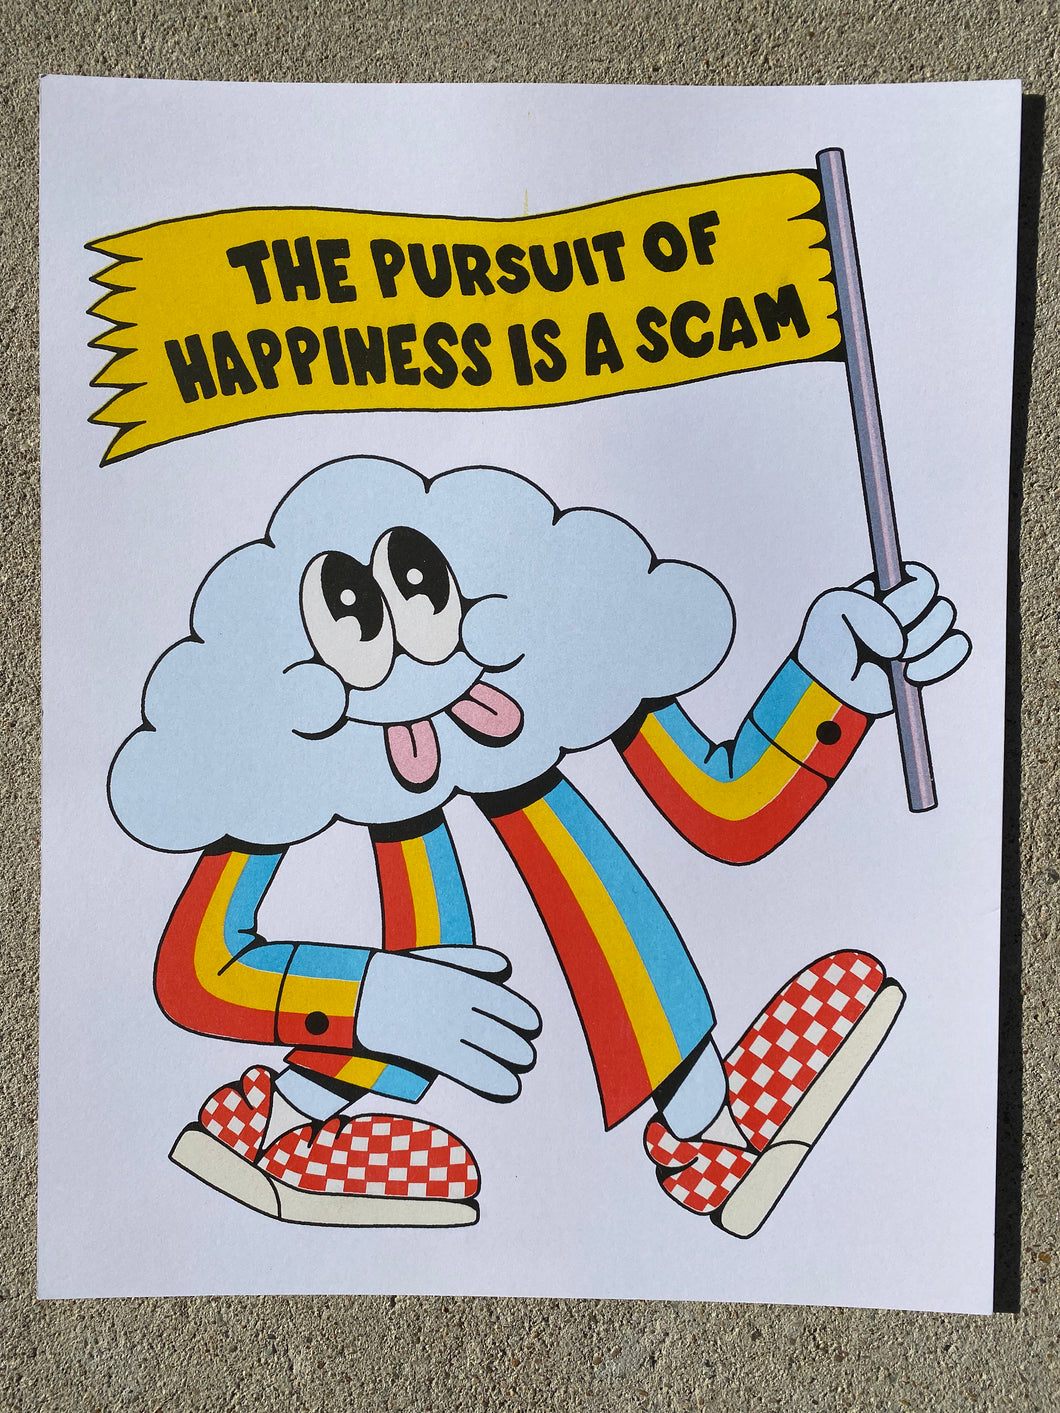 A white poster with a cartoon blue cloud with arms and legs.  The cloud has googly eyes and 2 tongues sticking out.  It is wearing a striped suit of red, yellow & blue and red checkered tennis shoes.  It is holding a yellow flag that reads 